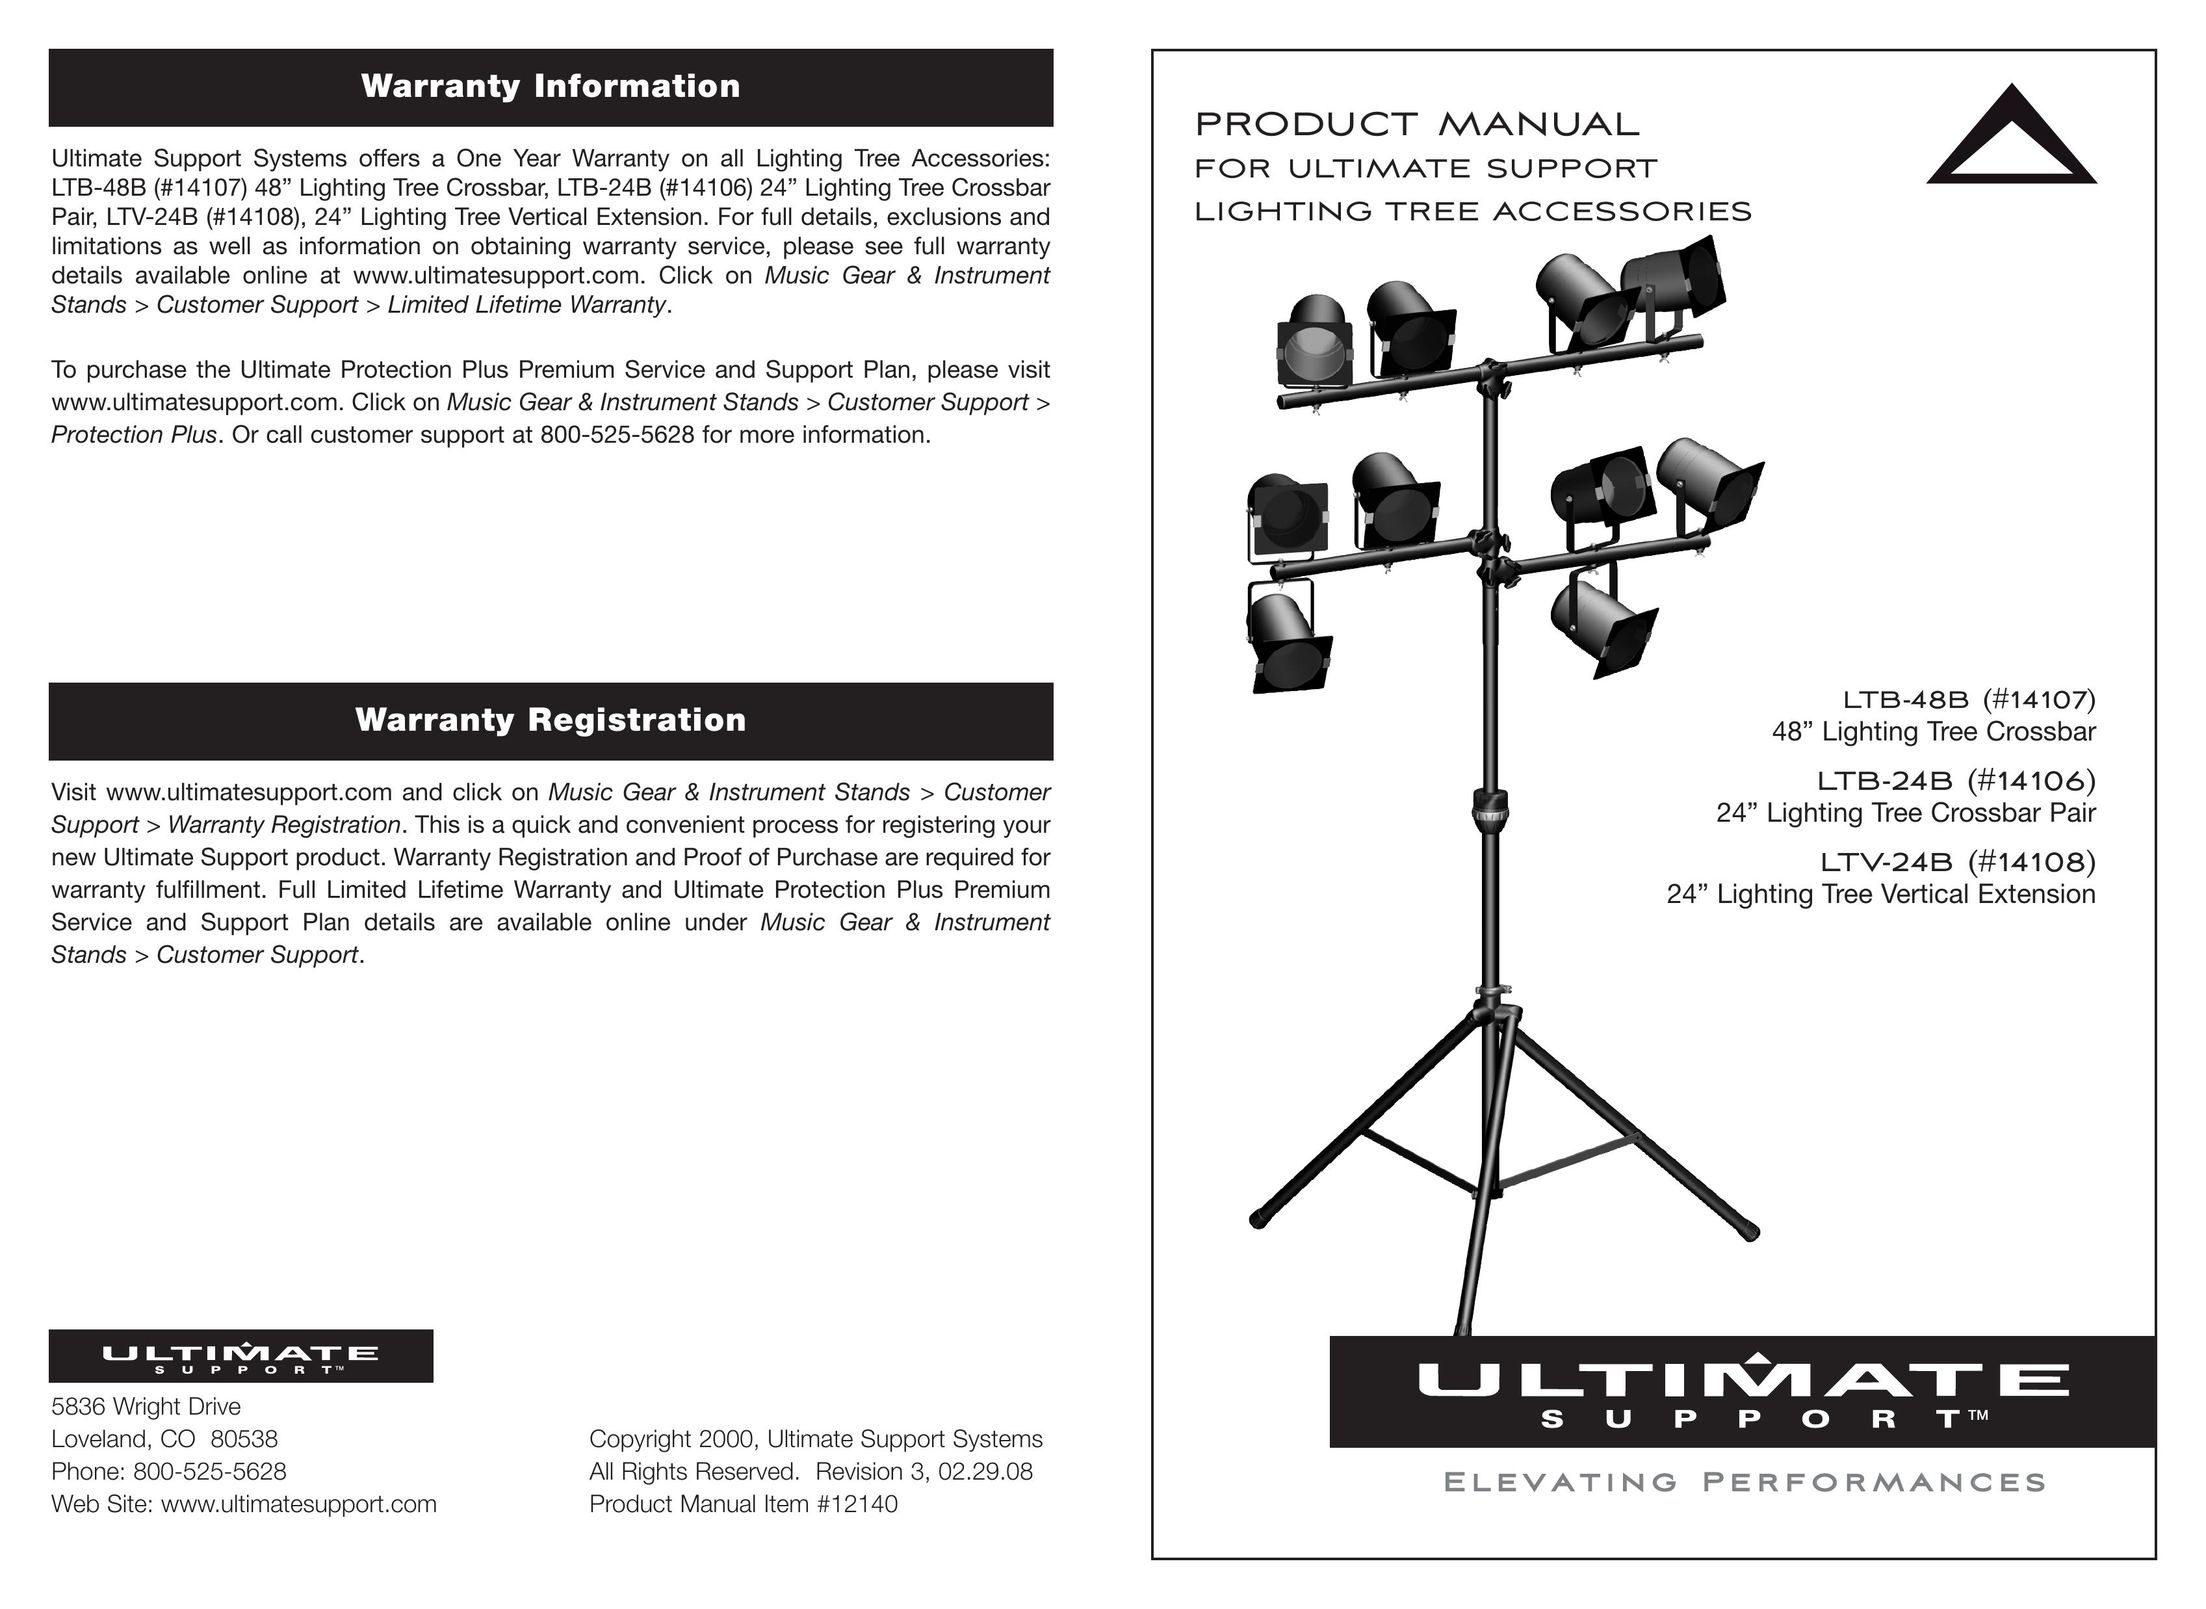 Ultimate Support Systems LTV-24B Indoor Furnishings User Manual